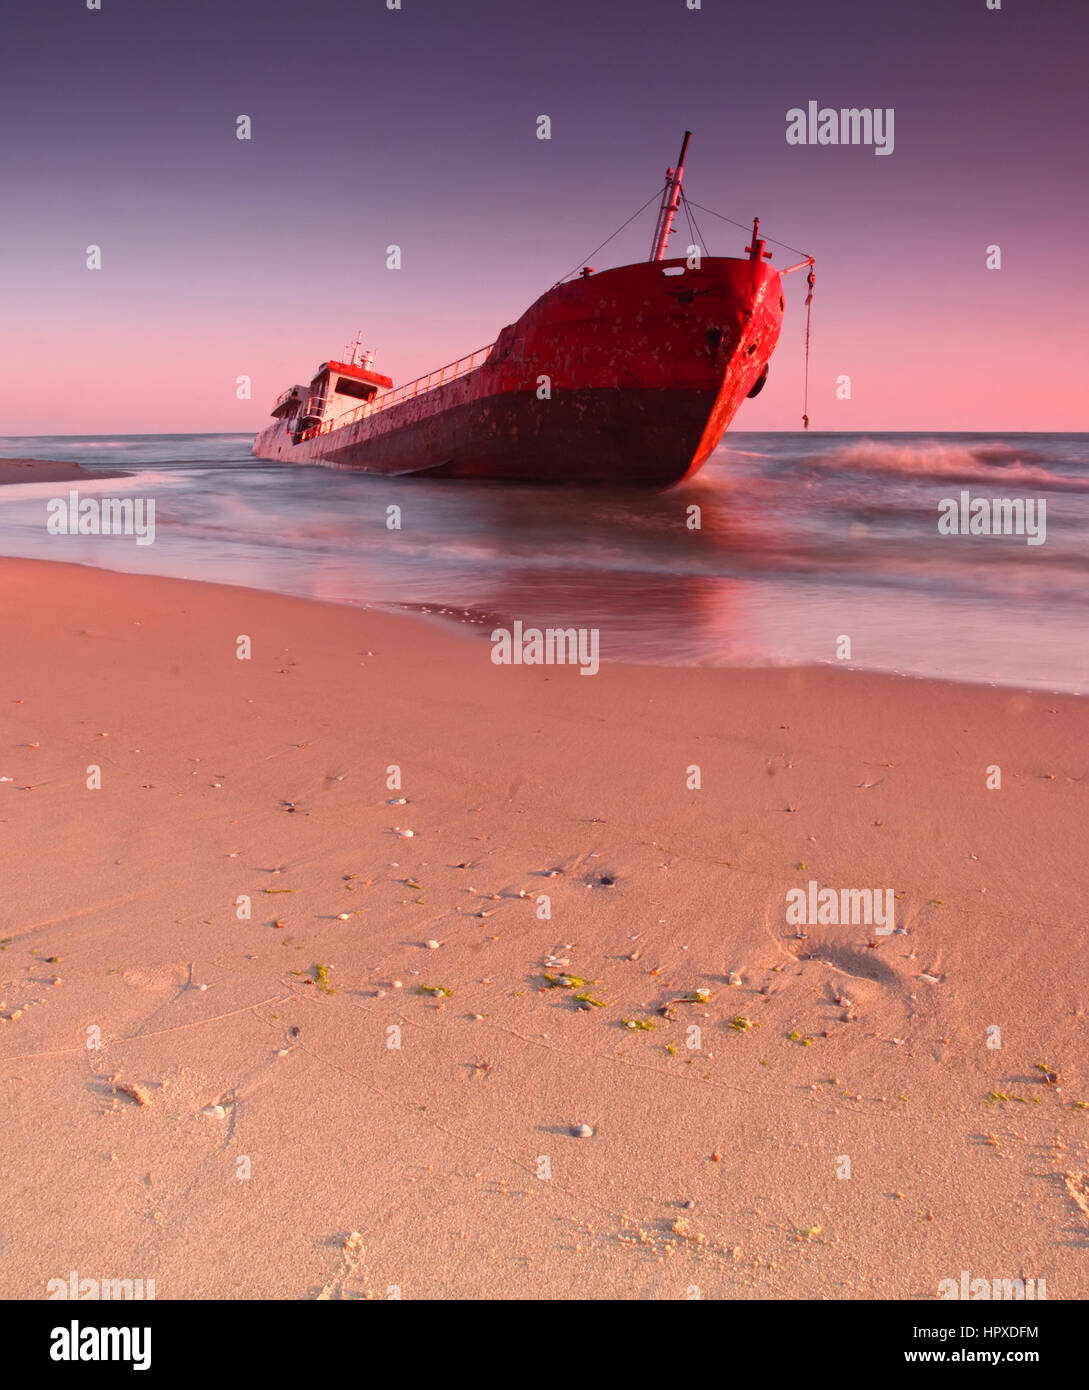 Ship after wreck on the coast with colorful pink sunset Stock Photo